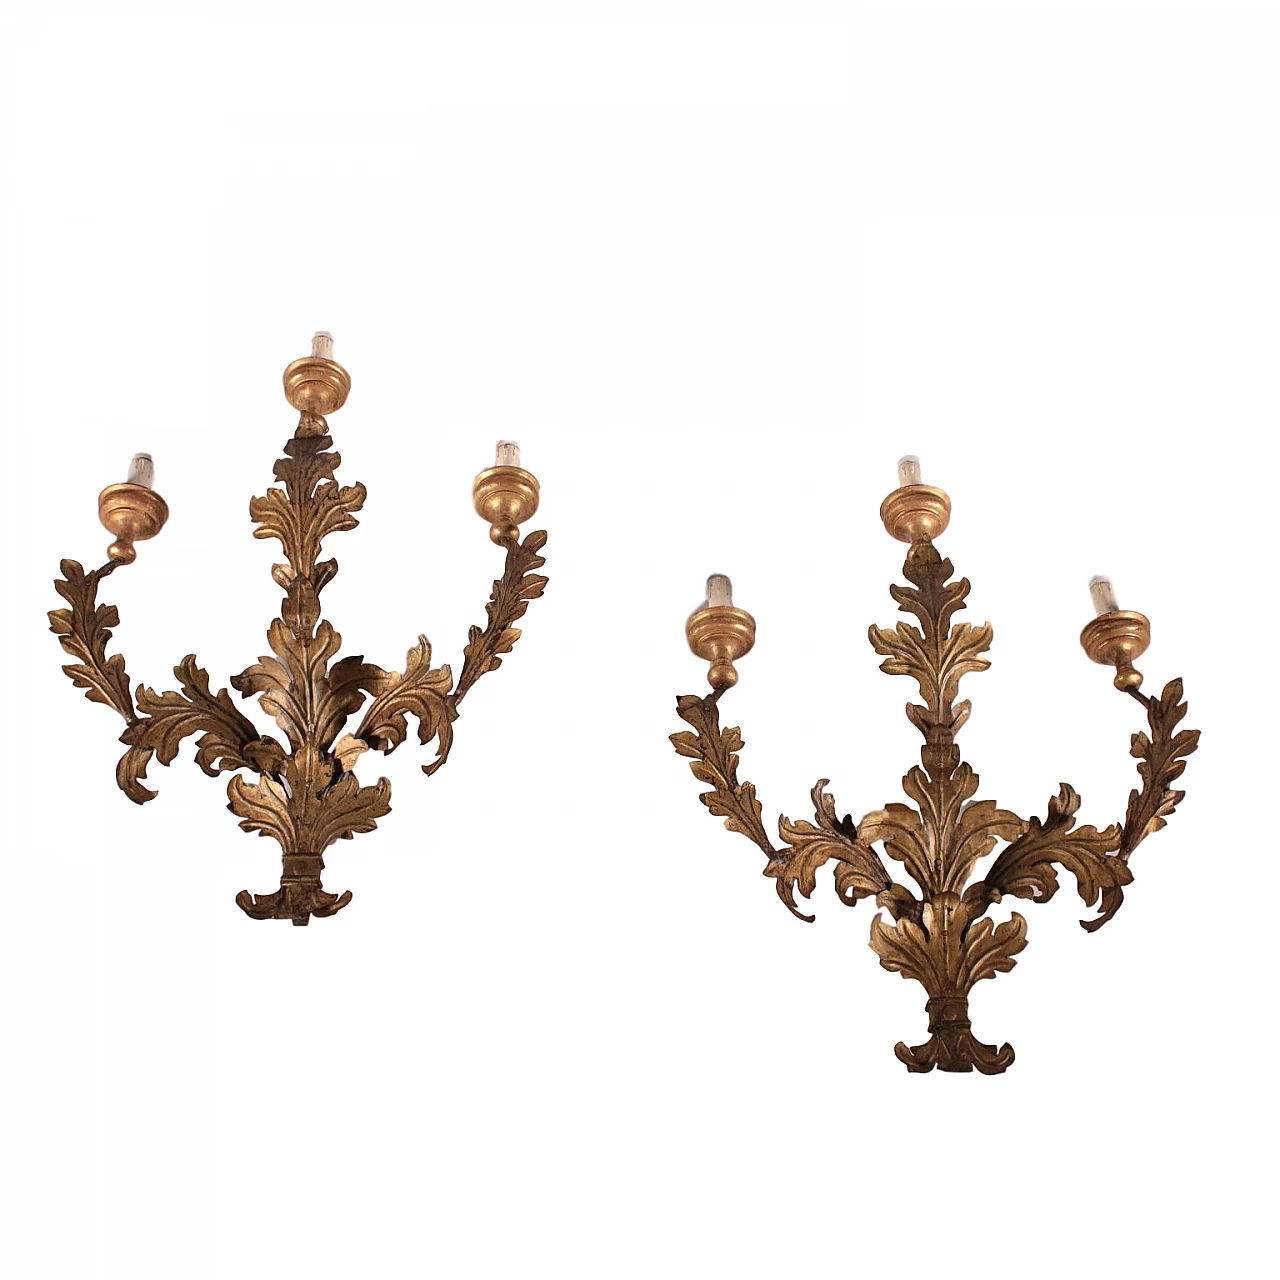 Pair of three-armed wall sconces with leaf decoration, 18th century 1